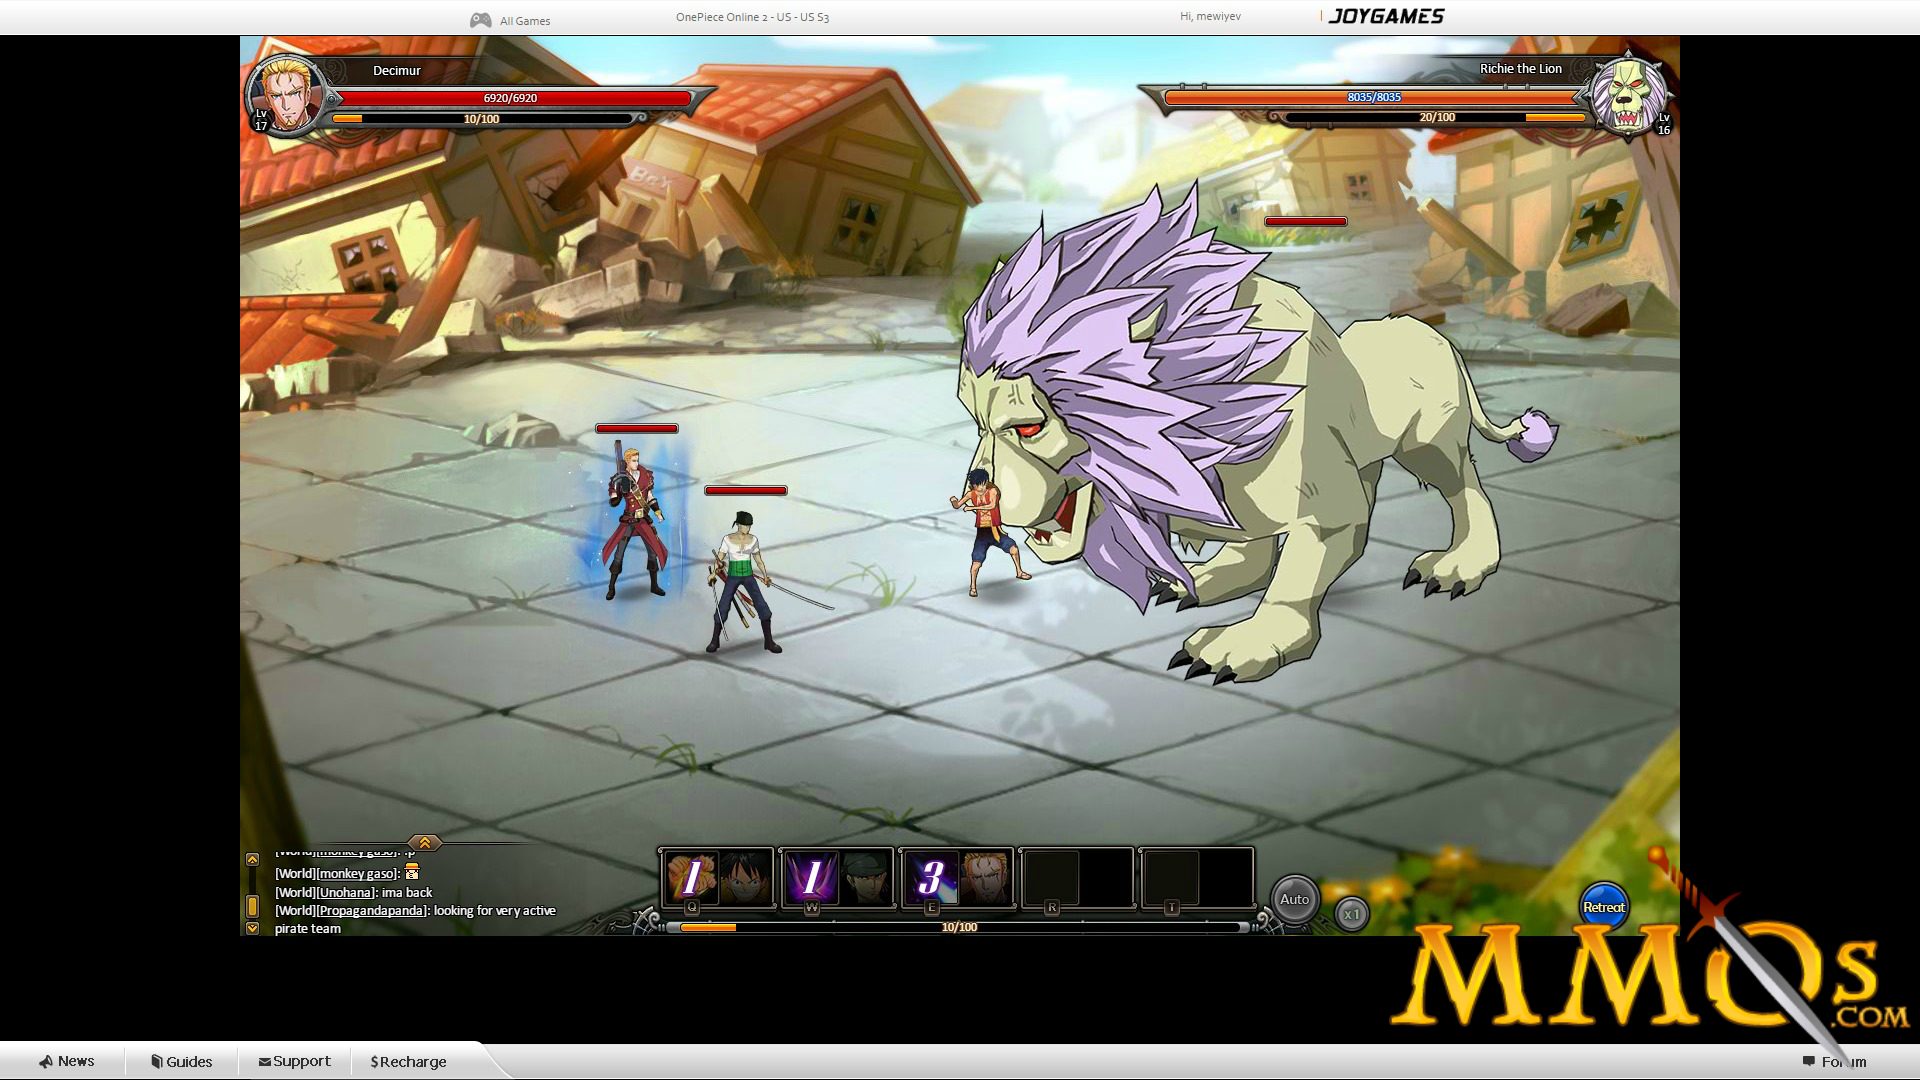 One Piece Online 2: Pirate King Anime browser RPG Game